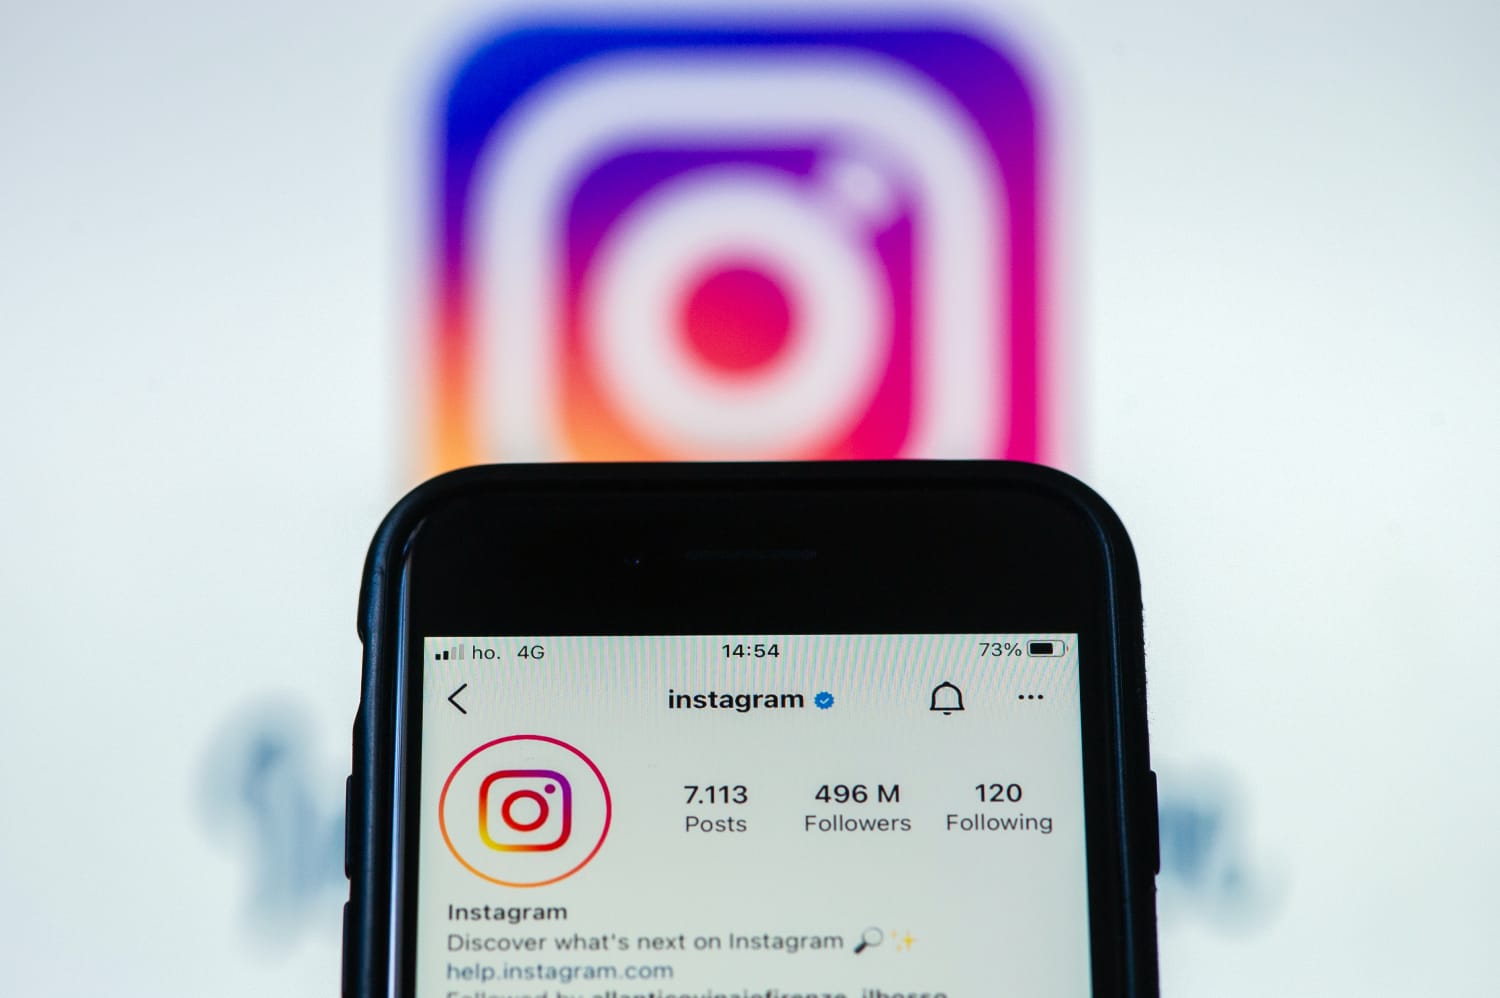 Instagram rolls back TikTok-style changes after mounting criticism